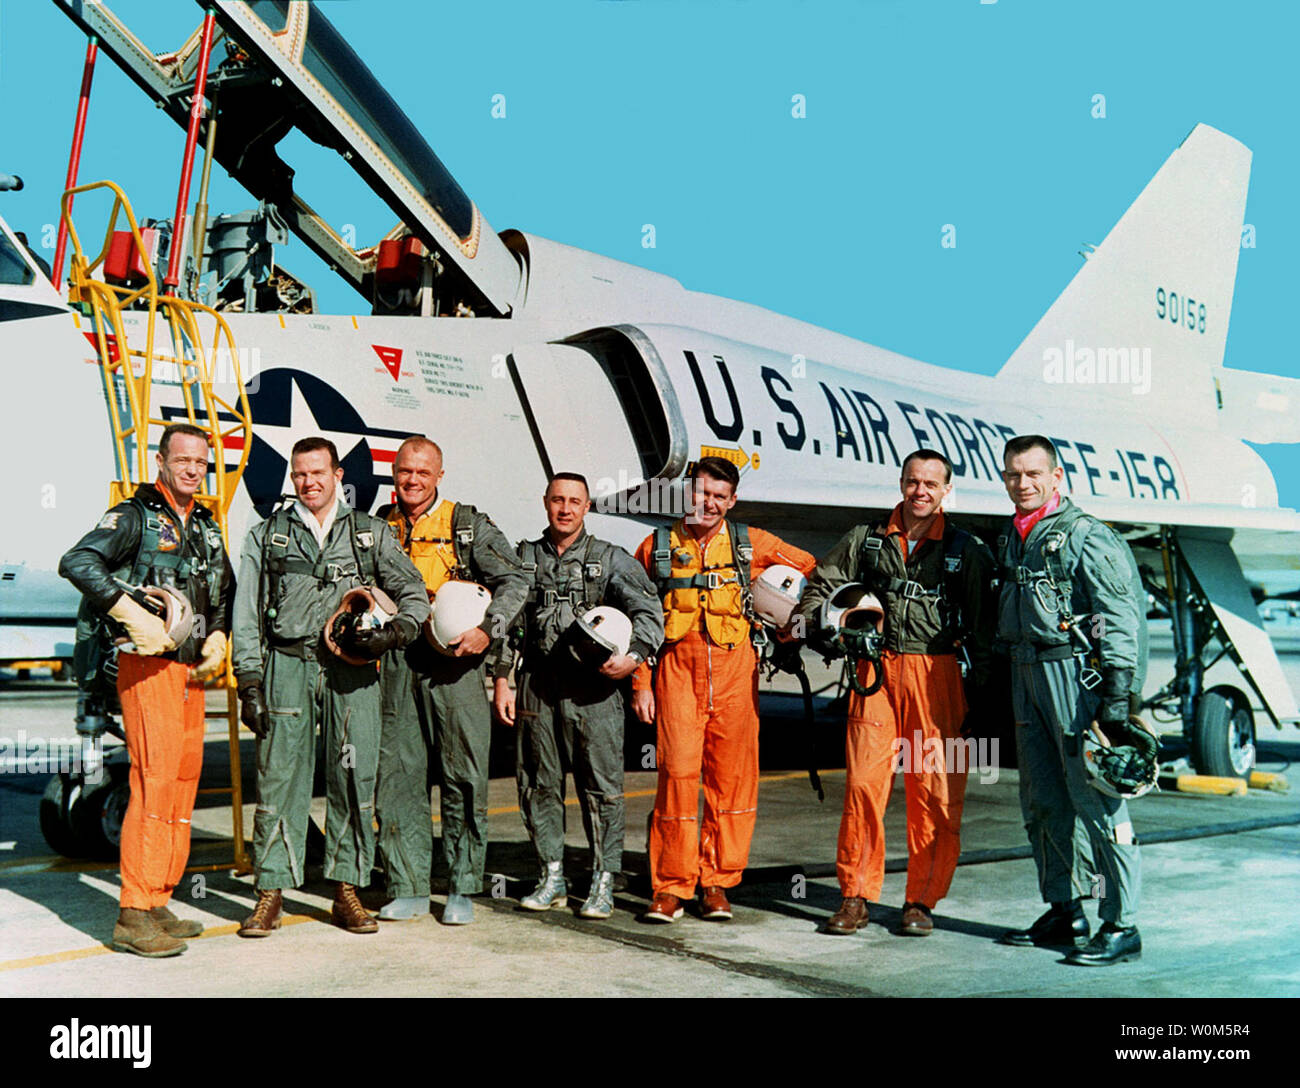 Gordon Cooper Jr., one of America's first seven astronauts, died on October 4, 2004 at his home in Ventura, Calif. He was 77 years old.  Cooper piloted the sixth and last flight of the Mercury program and later commanded Gemini 5.  The file image shows the 'Original Seven' Mercury astronauts. From left: Scott Carpenter, Cooper, John Glenn, Gus Grissom, Wally Schirra, Alan Shepard, and Deke Slayton.   (UPI Photo/NASA) Stock Photo